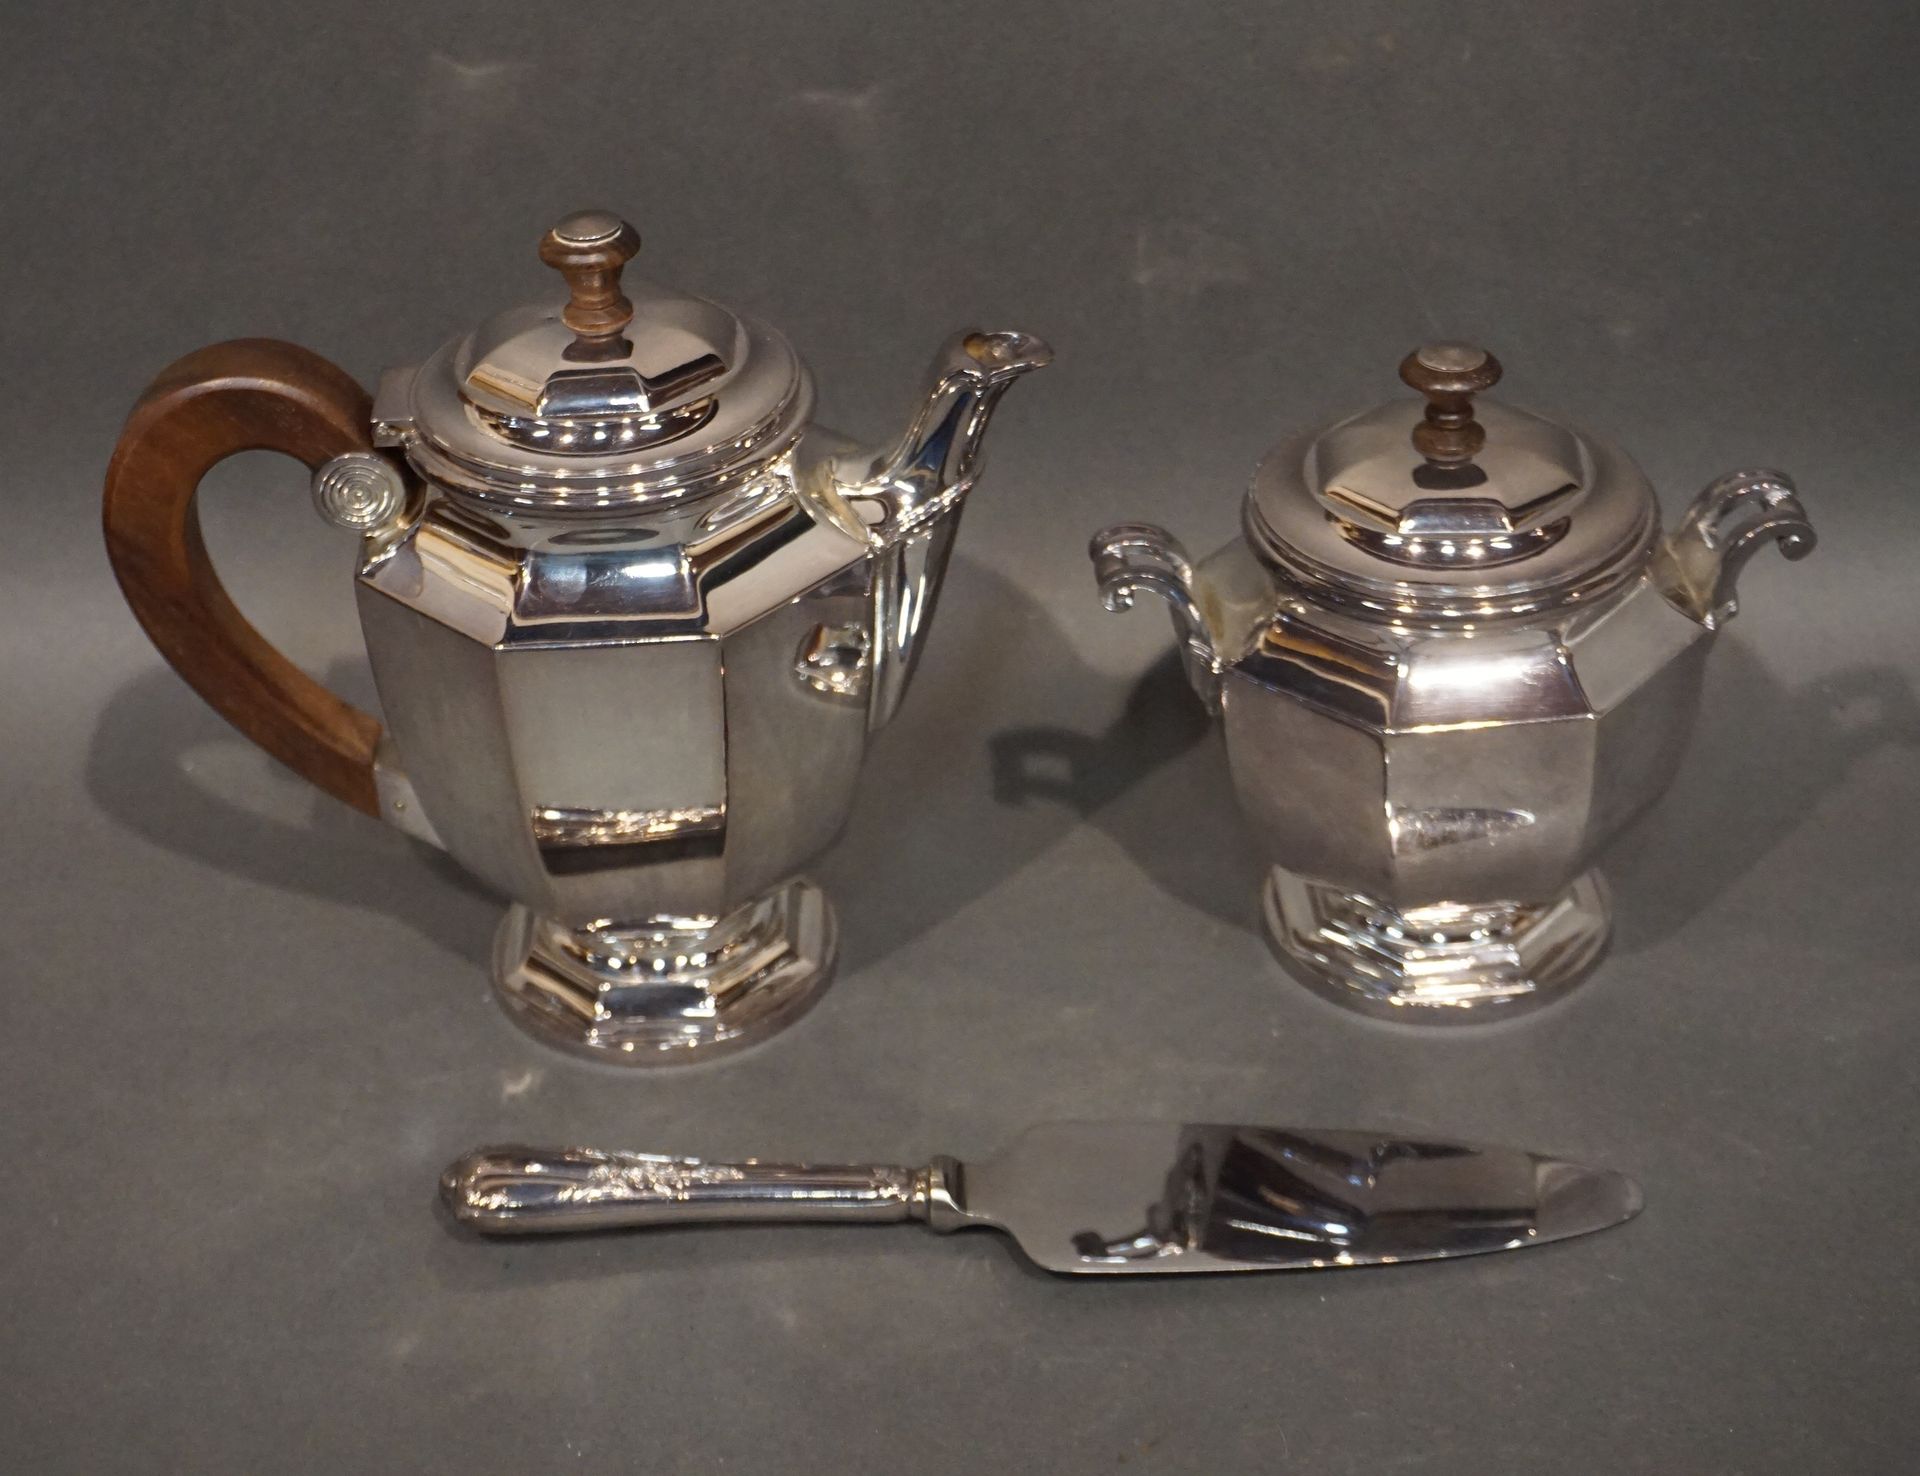 CHRISTOFLE Teapot, sugar bowl and pie server in silver plated metal. CHRISTOFLE